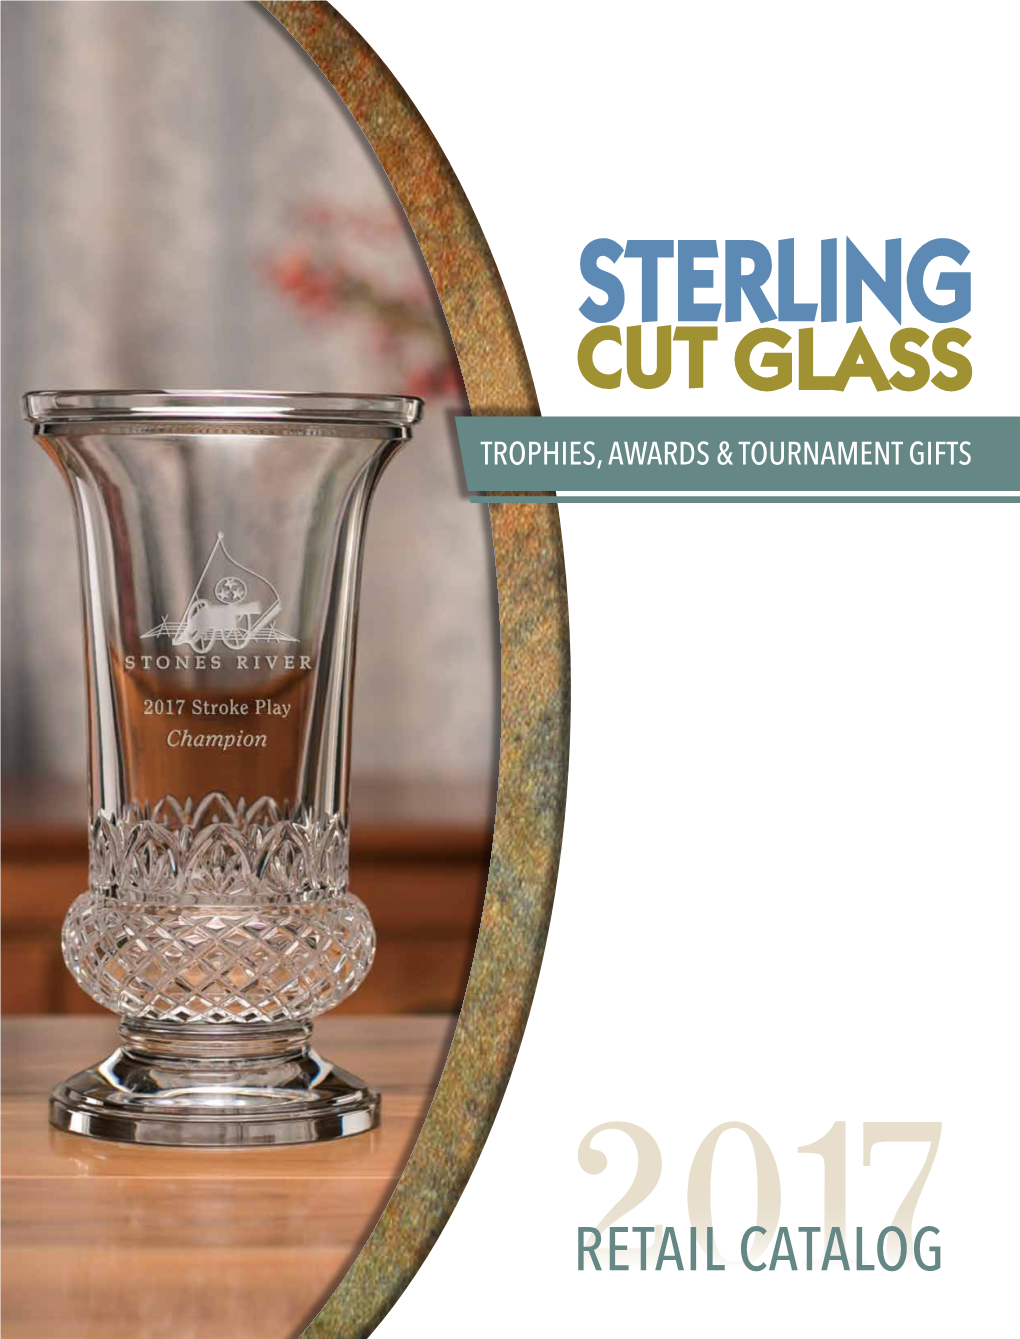 RETAIL CATALOG a Note from Sterling Cut Glass Contents